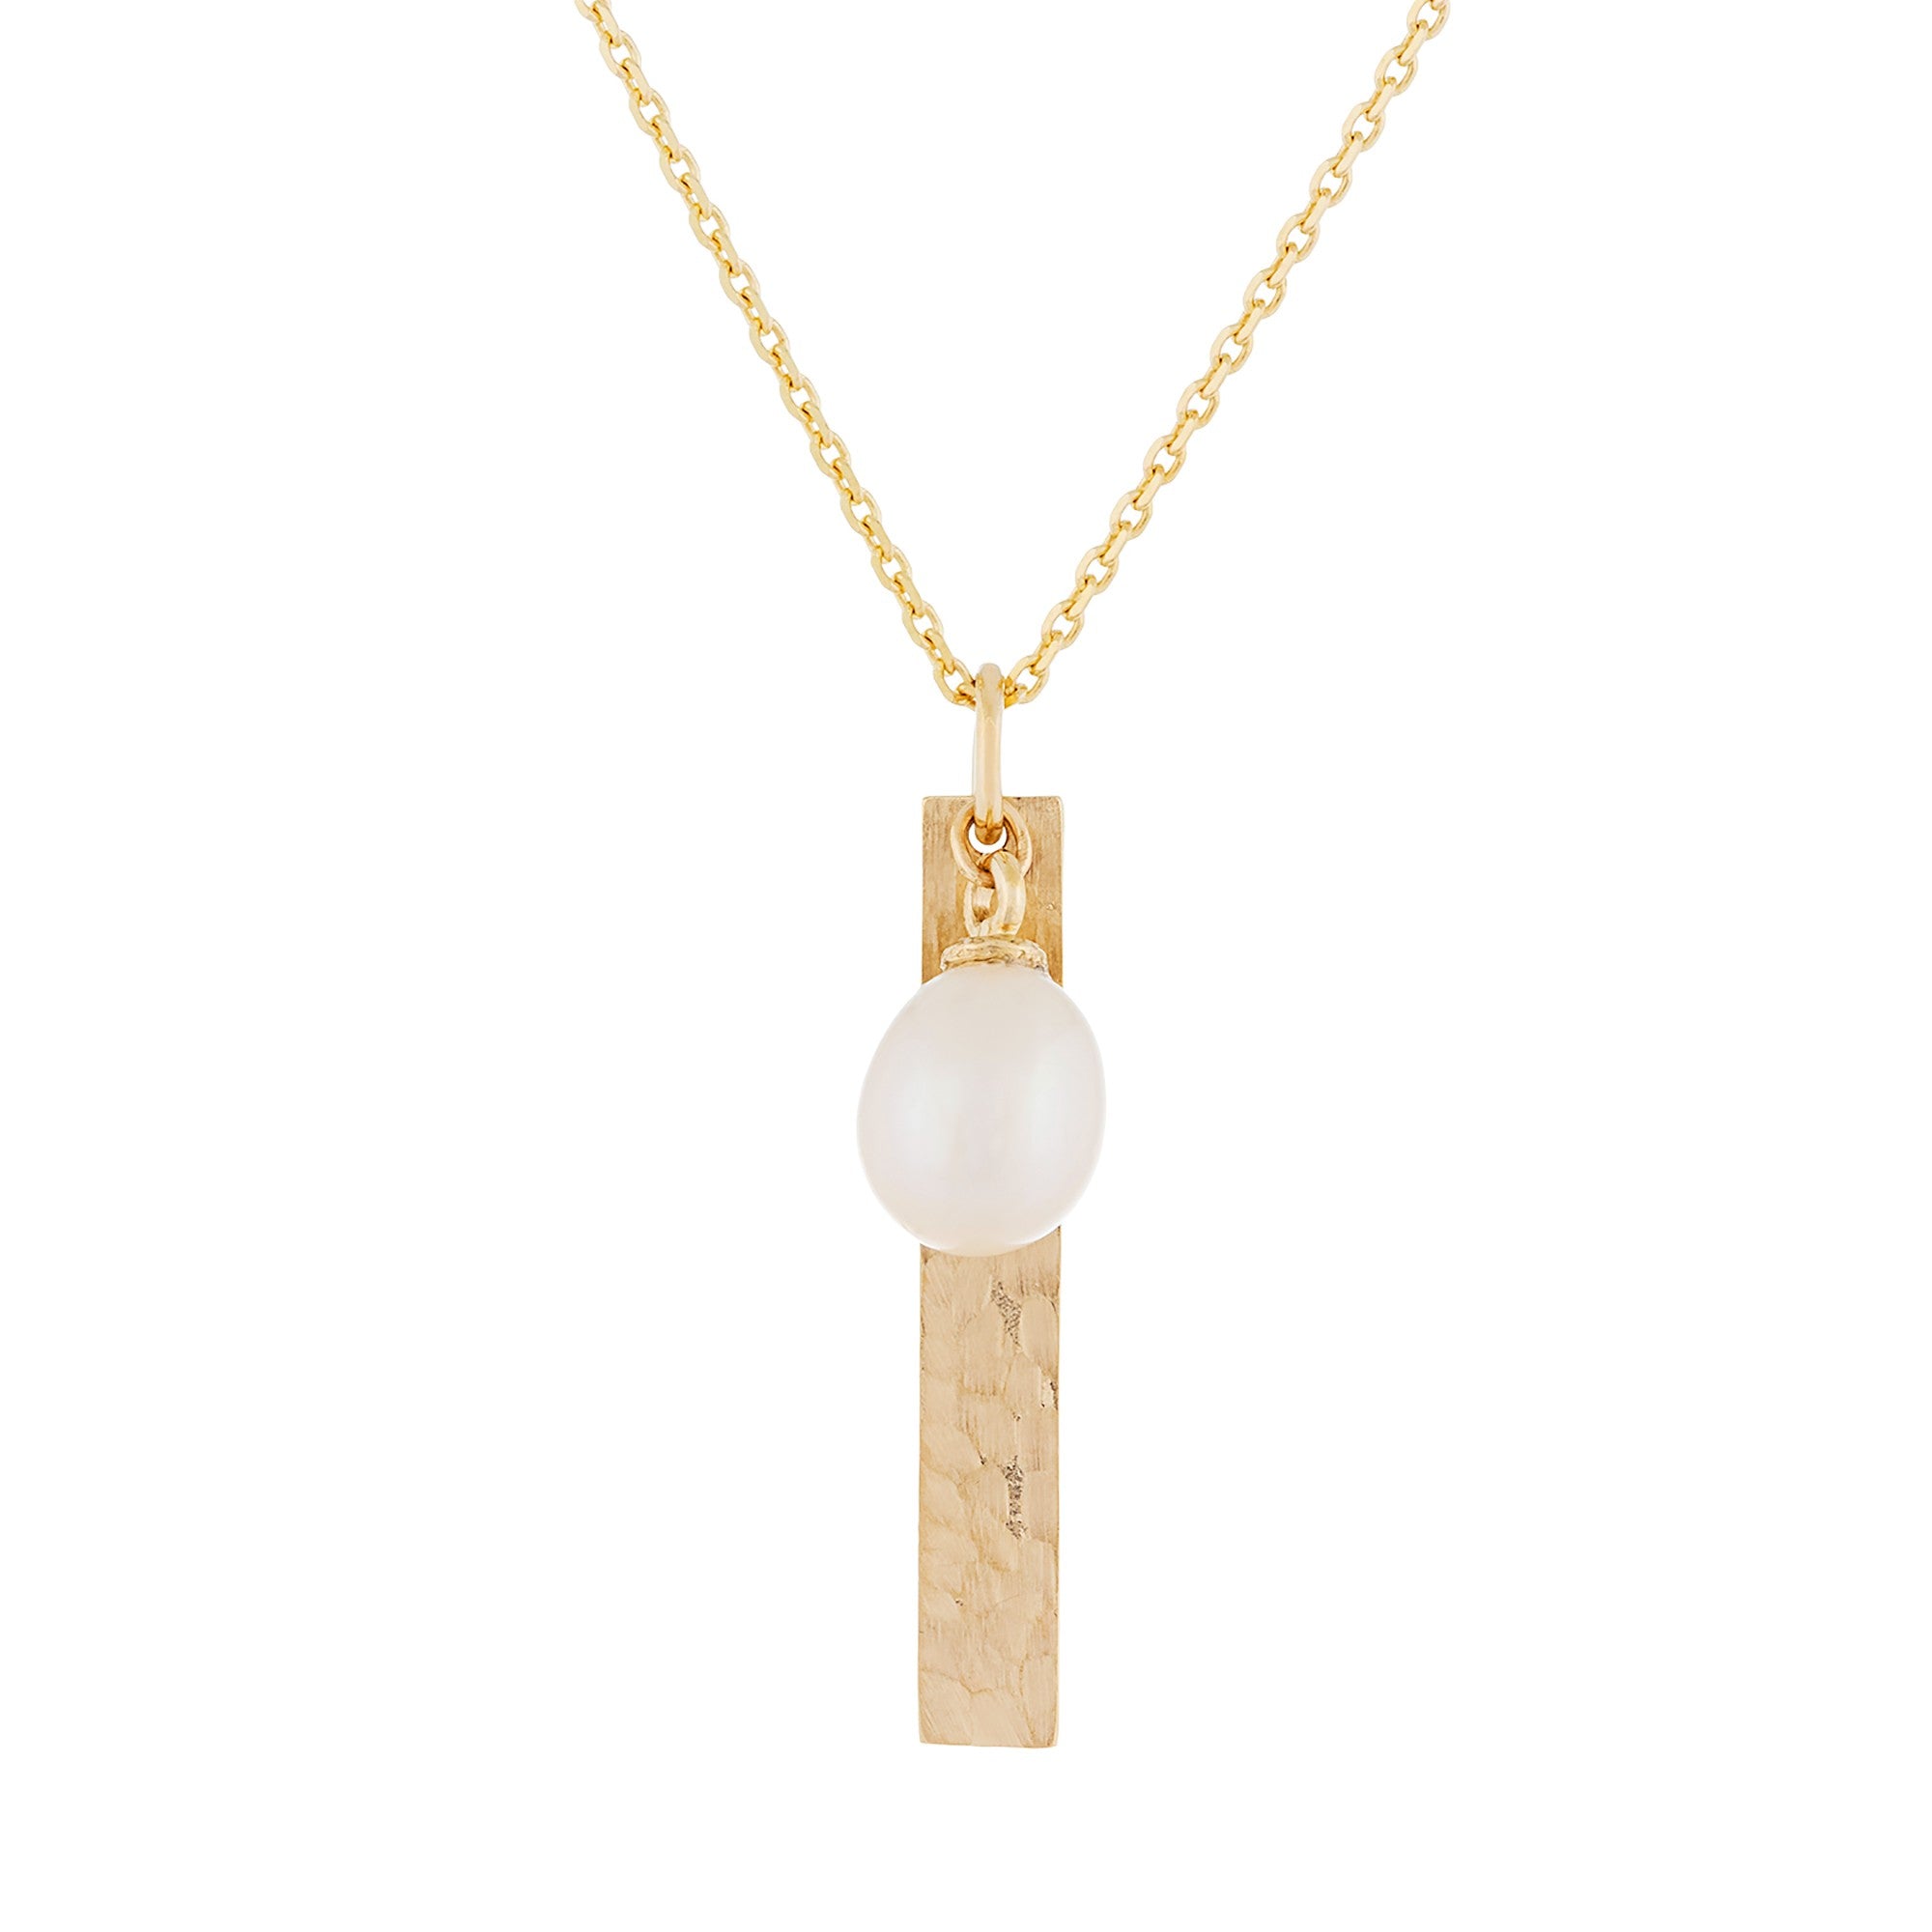 title:Splendid Pearls 14K Yellow Gold Pearl Pendant HE-226YG;color:White